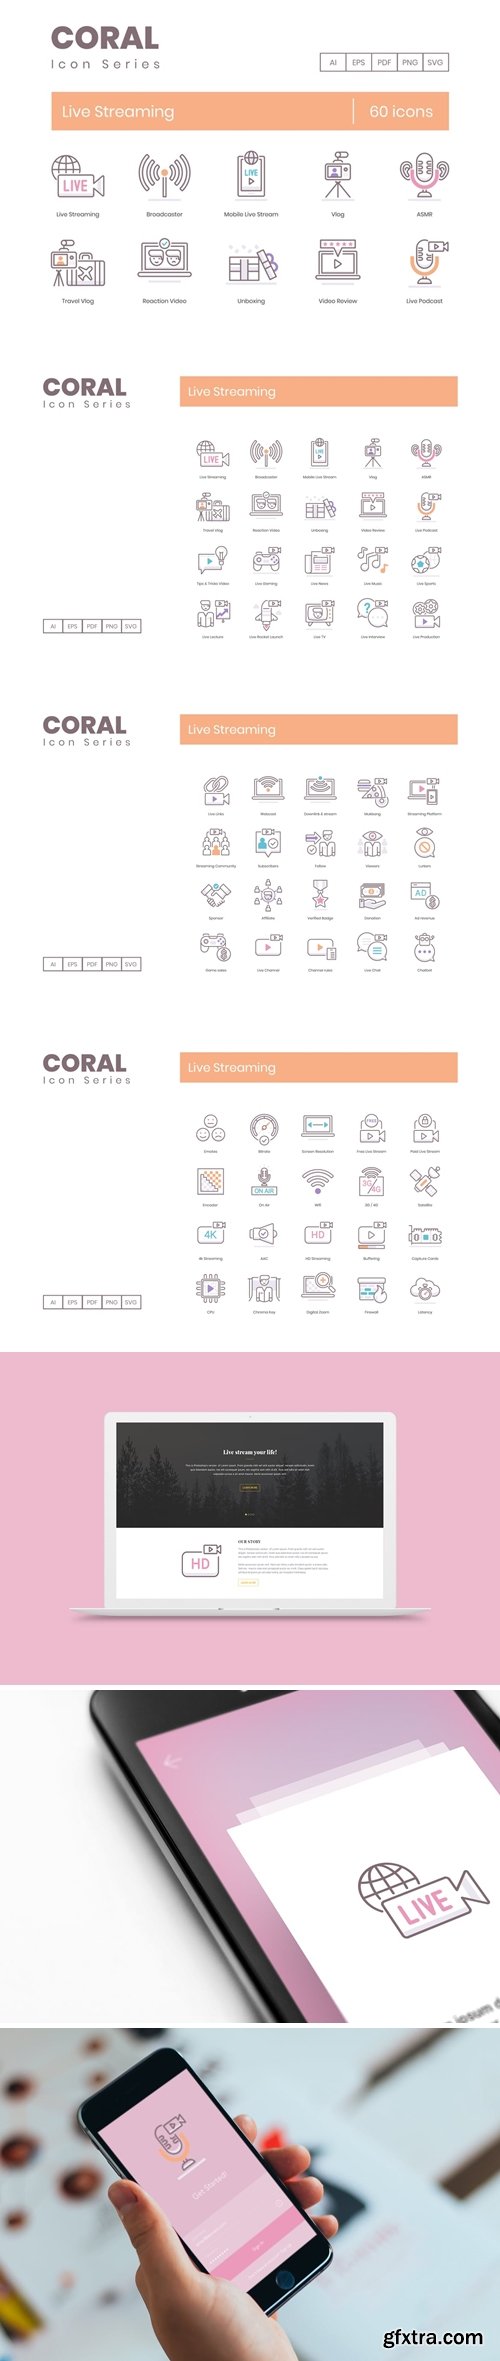 60 Live Streaming Icons - Coral Series